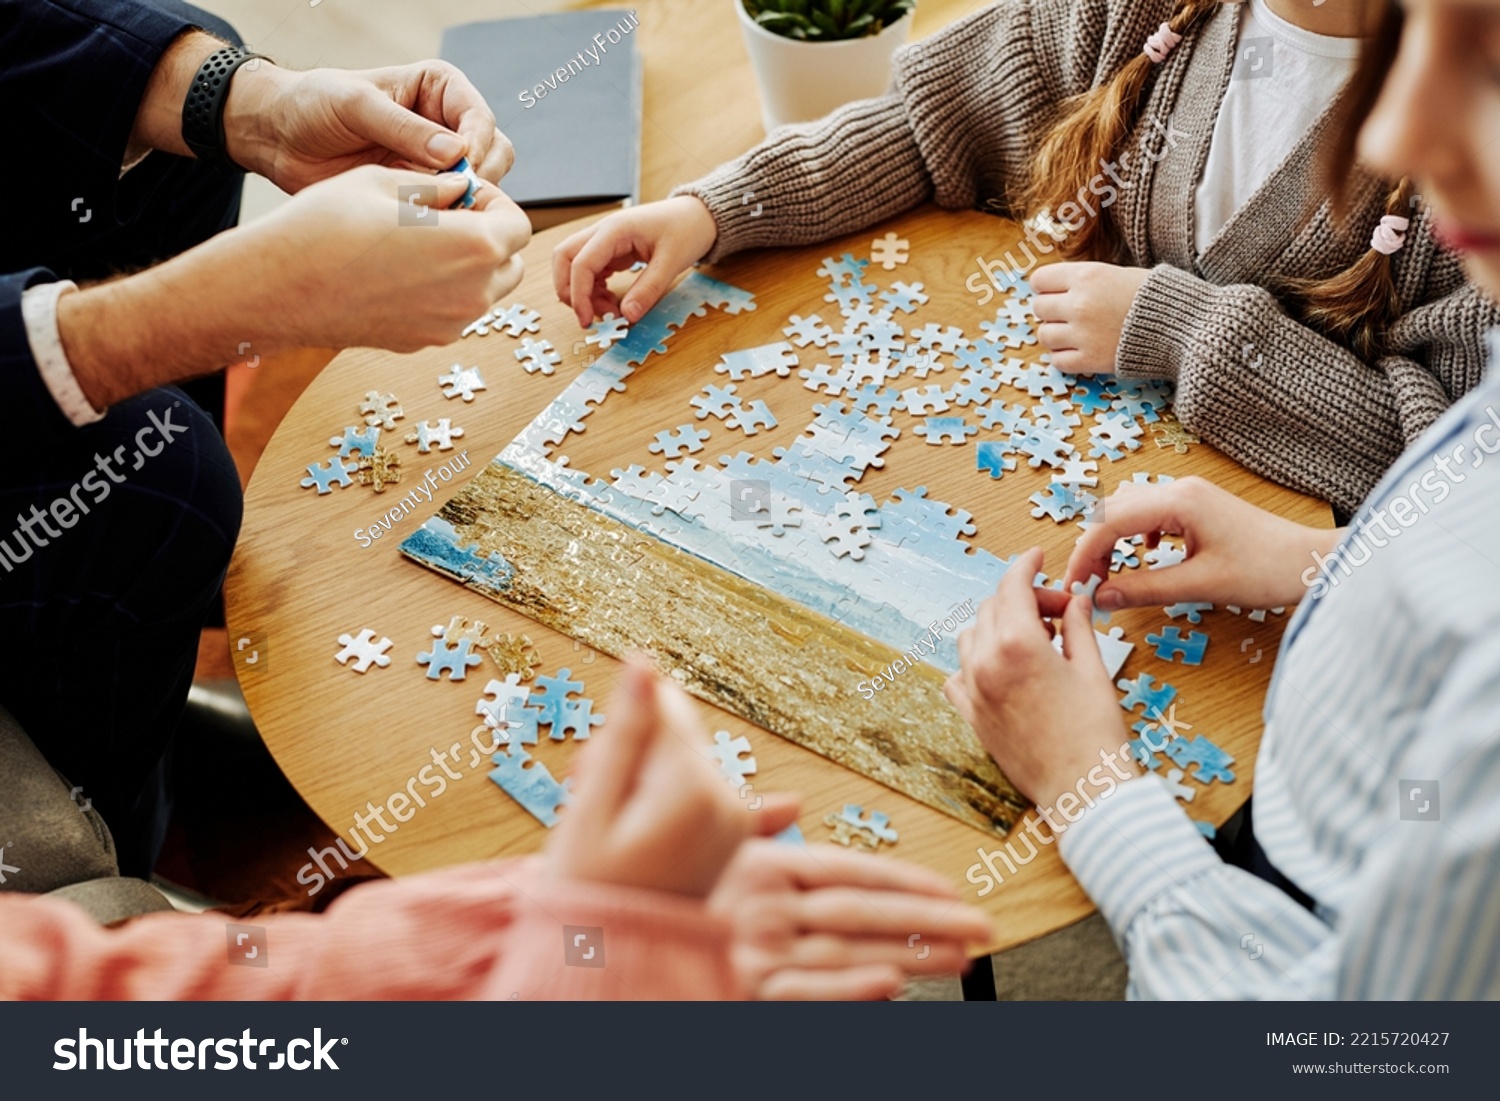 Close up of unrecognizable family playing jigsaw puzzle game together at home #2215720427